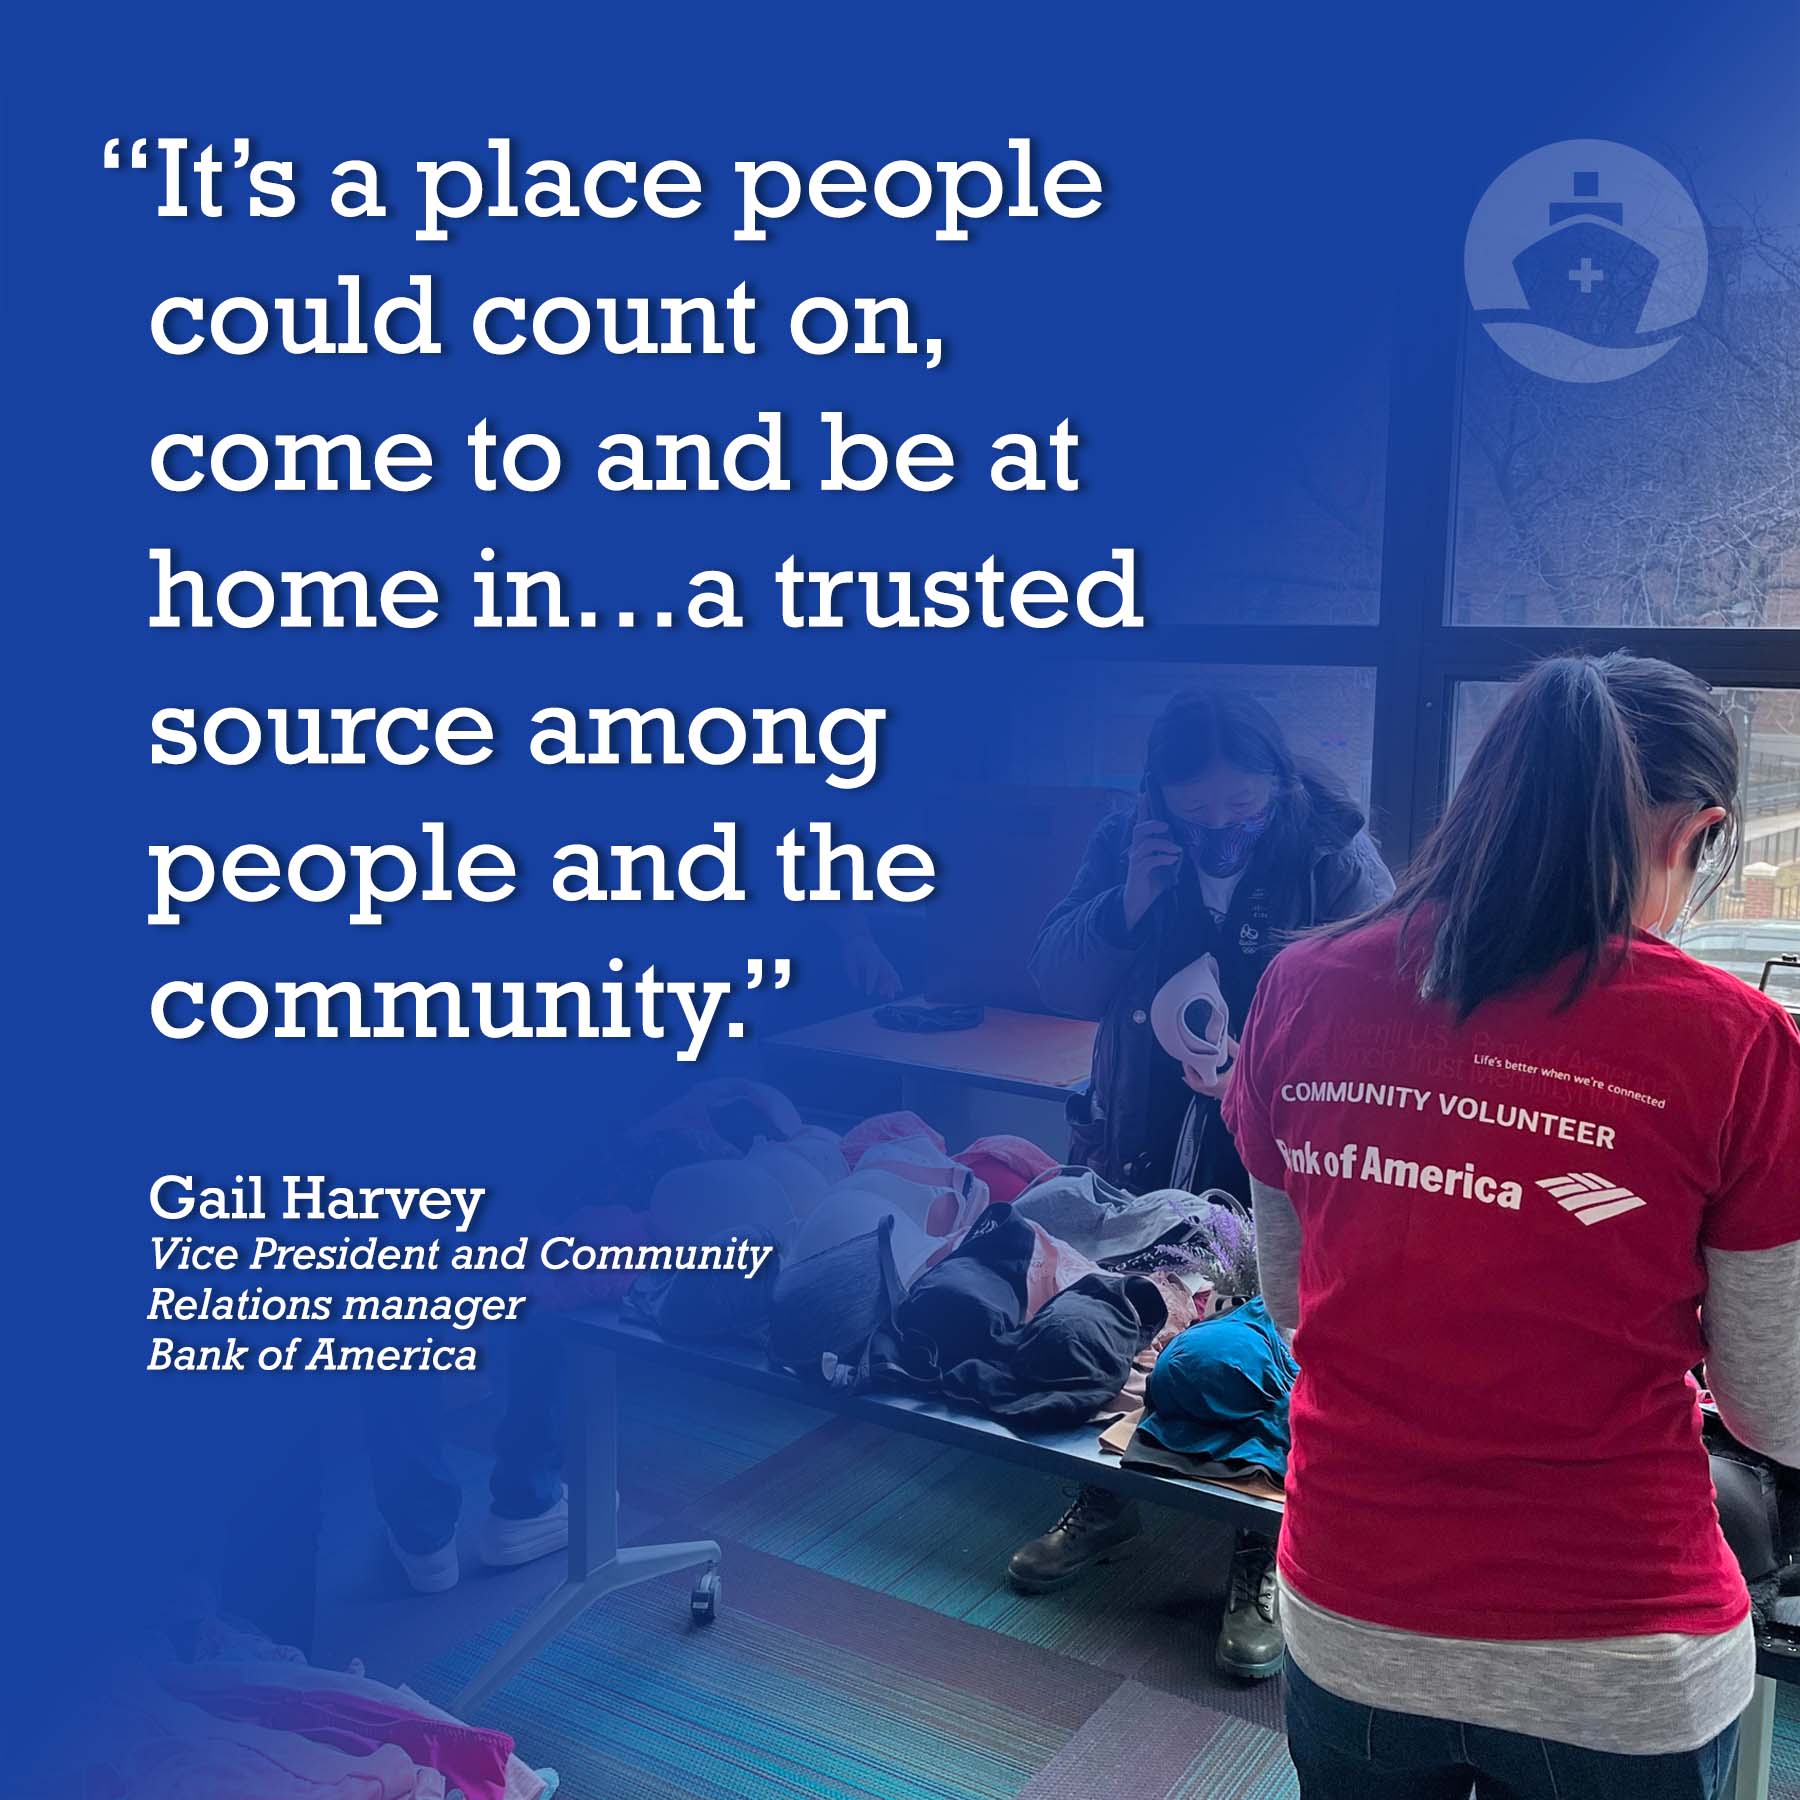 It’s a place people could count on, come to and be at home in…a trusted source among people and the community.” Gail Harvey, Vice President and Community Relations manager, Bank of America 